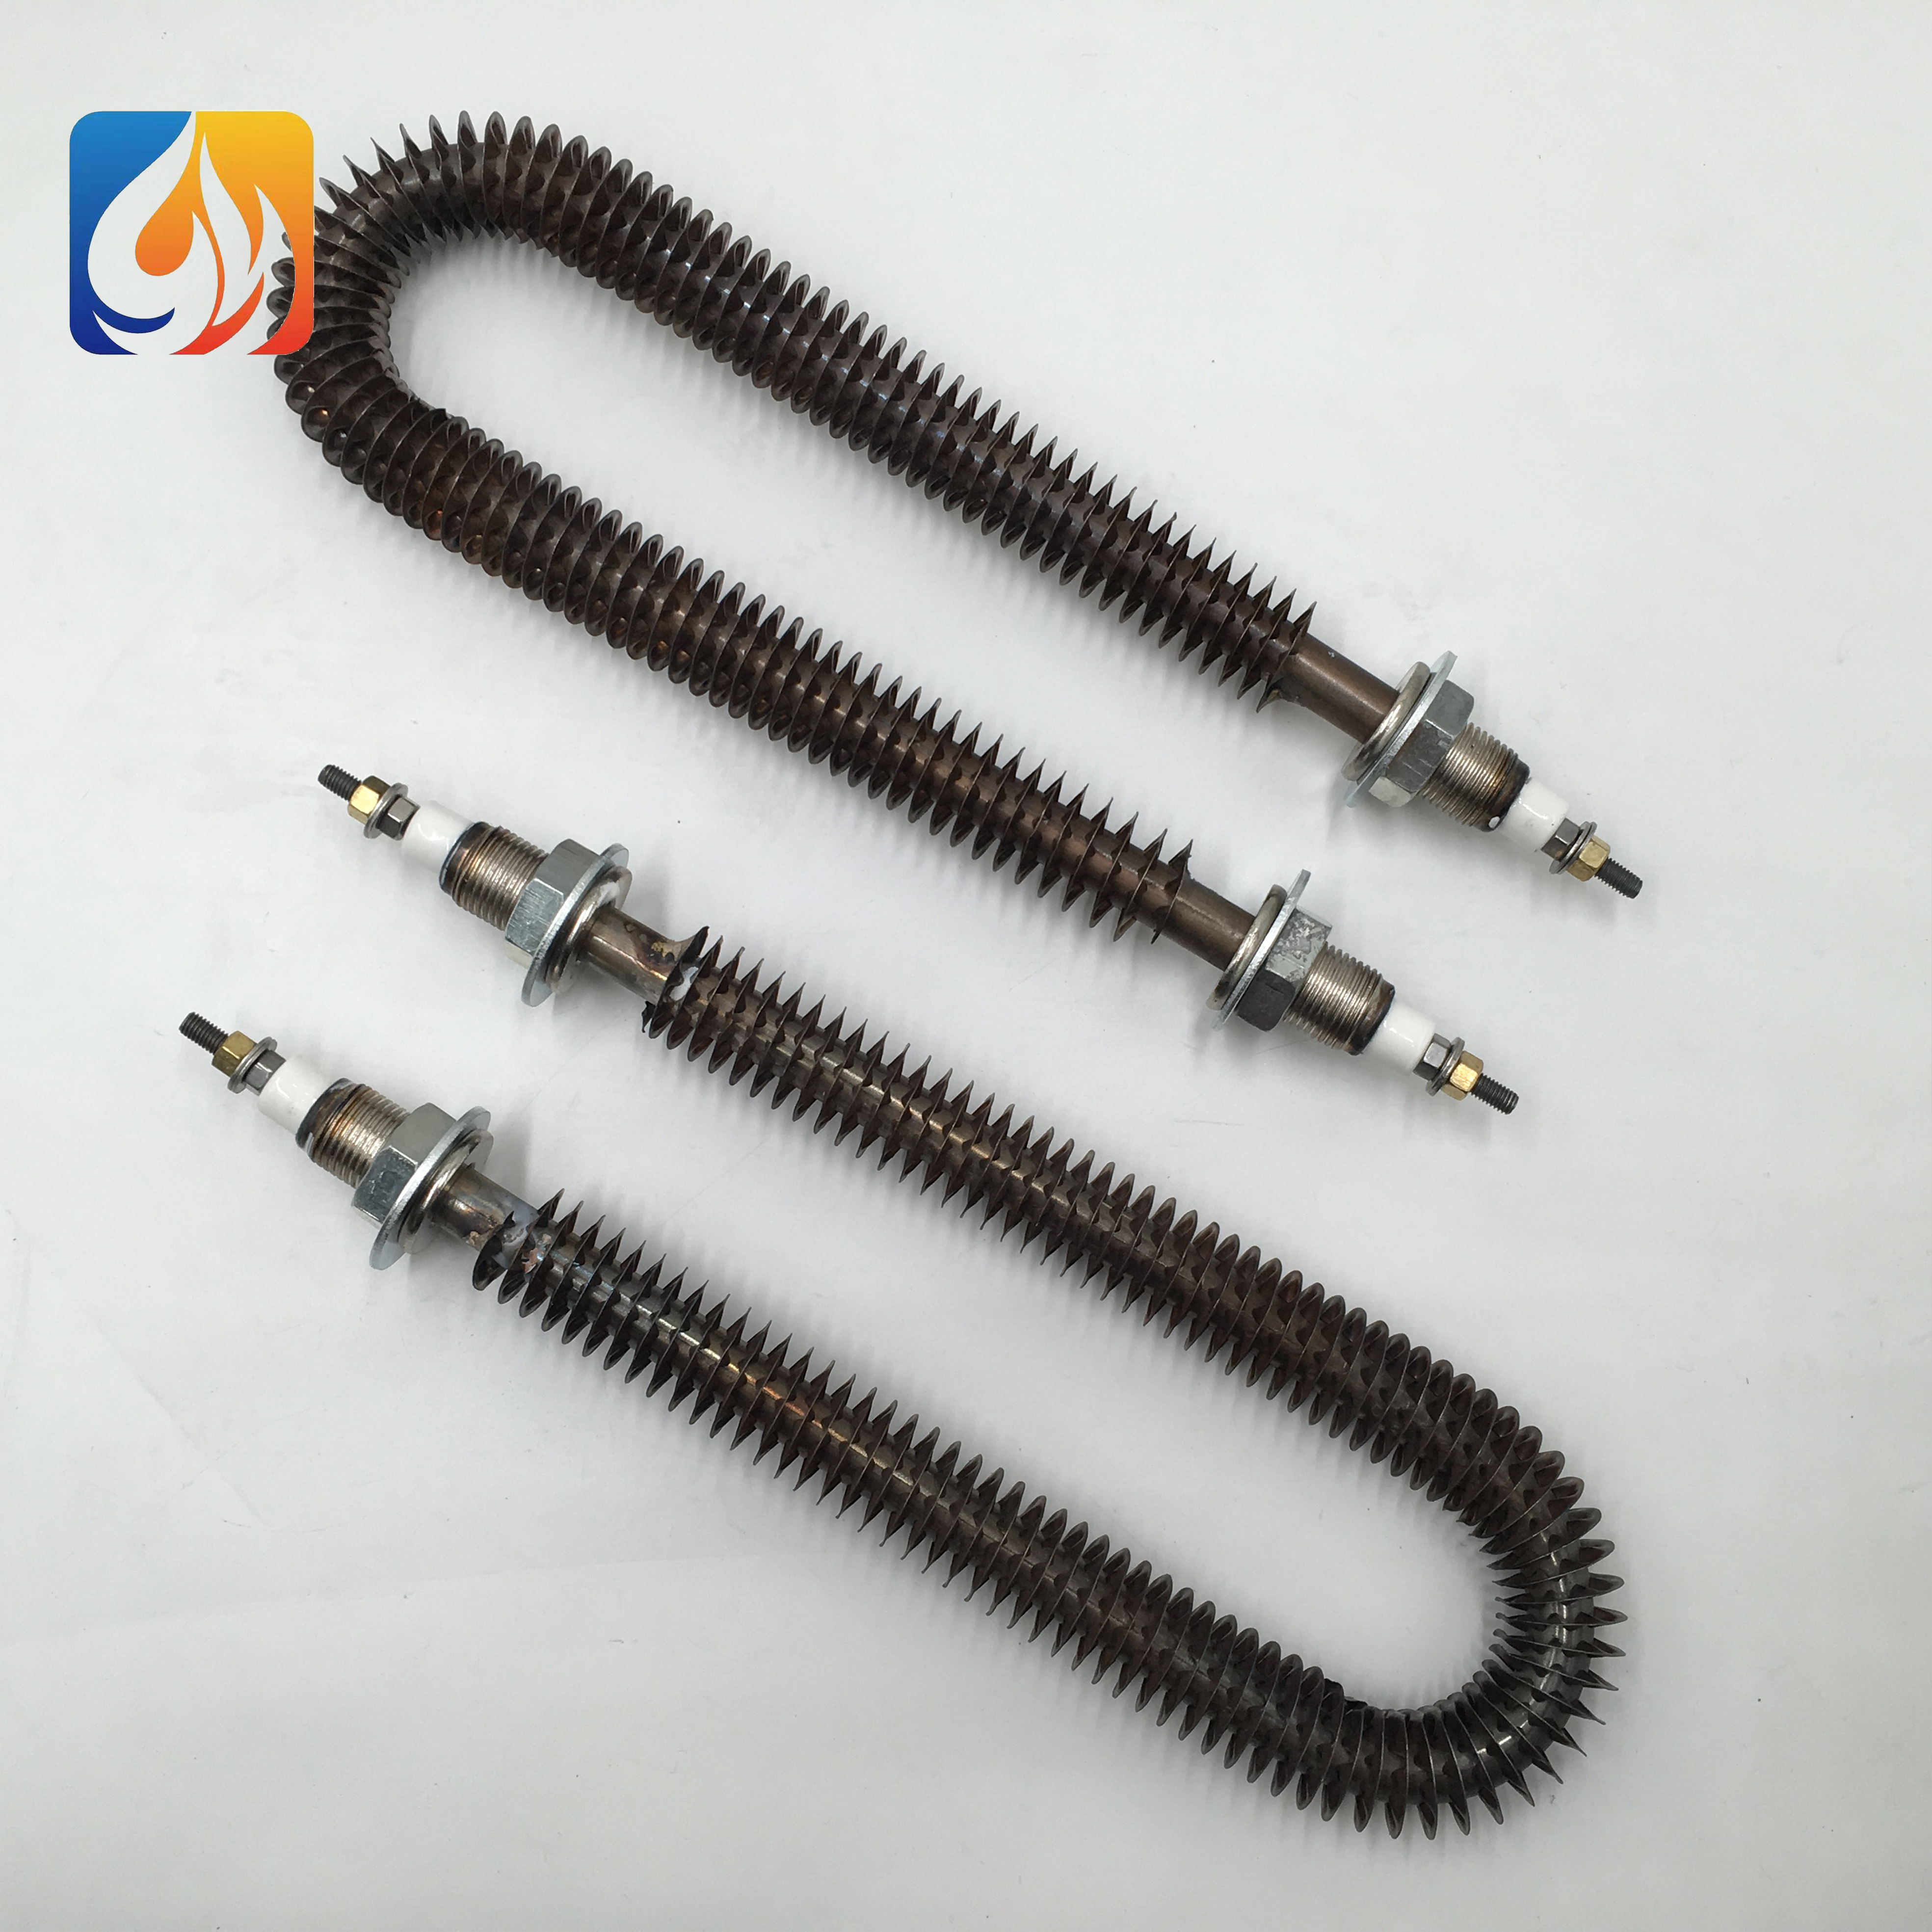 U shape high tempertaure stainless steel 304 fin heating element Featured Image